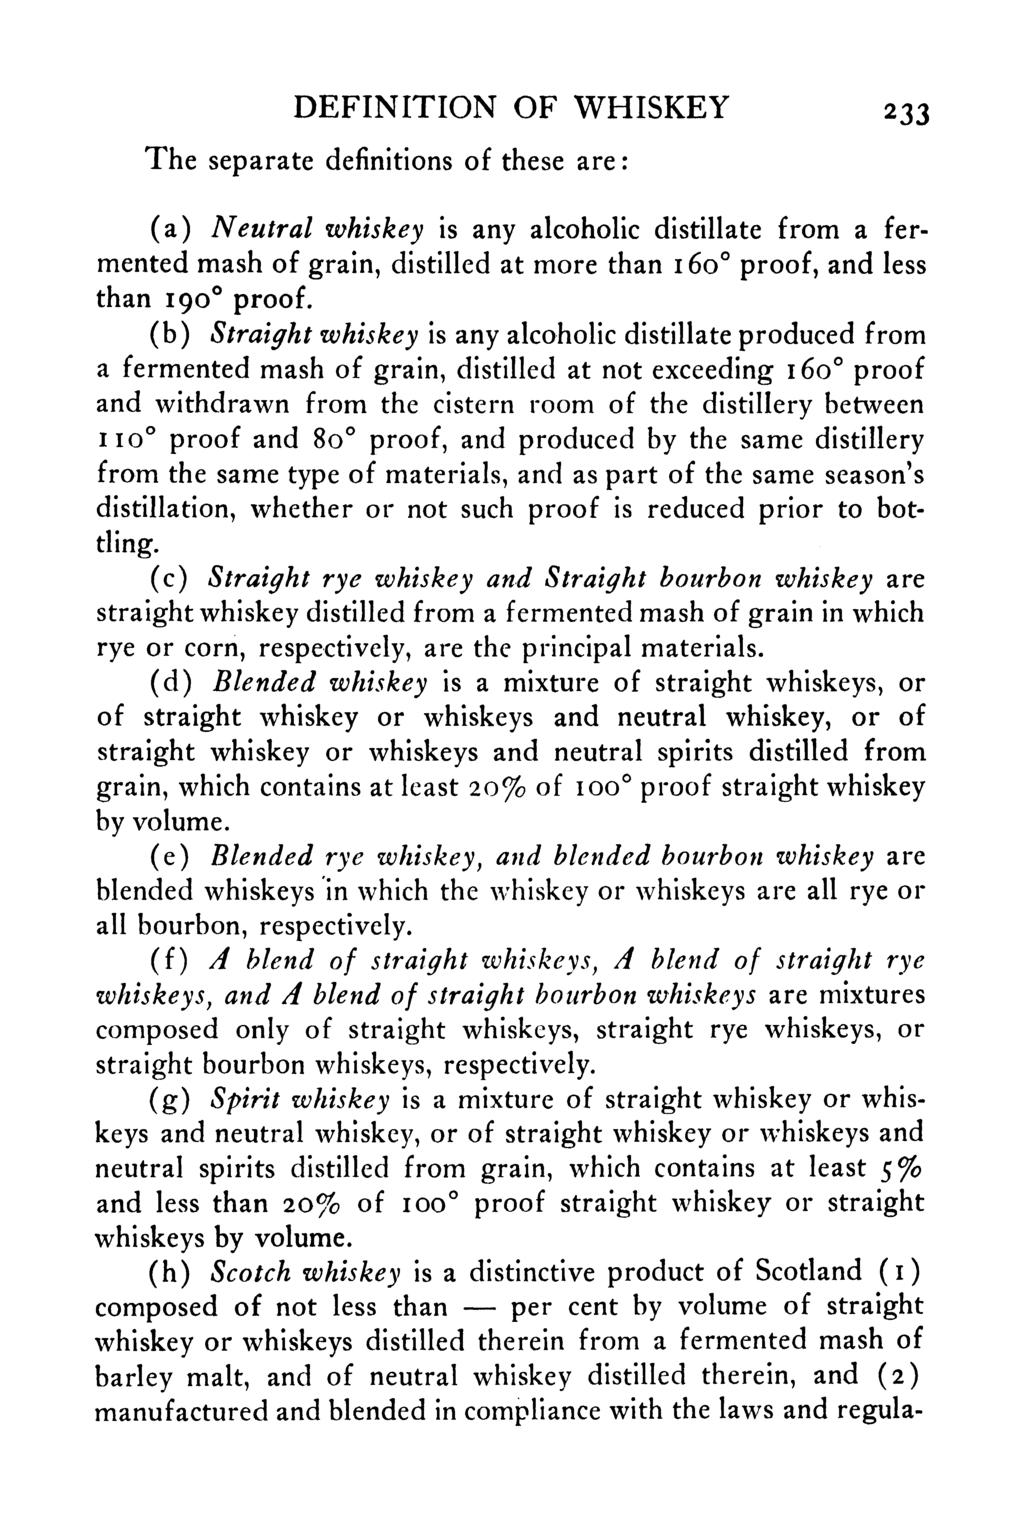 DEFINITION OF WHISKEY 233 The separate definitions of these are: (a) Neutral whiskey is any alcoholic distillate from a fermented mash of grain, distilled at more than 160 proof, and less than 190